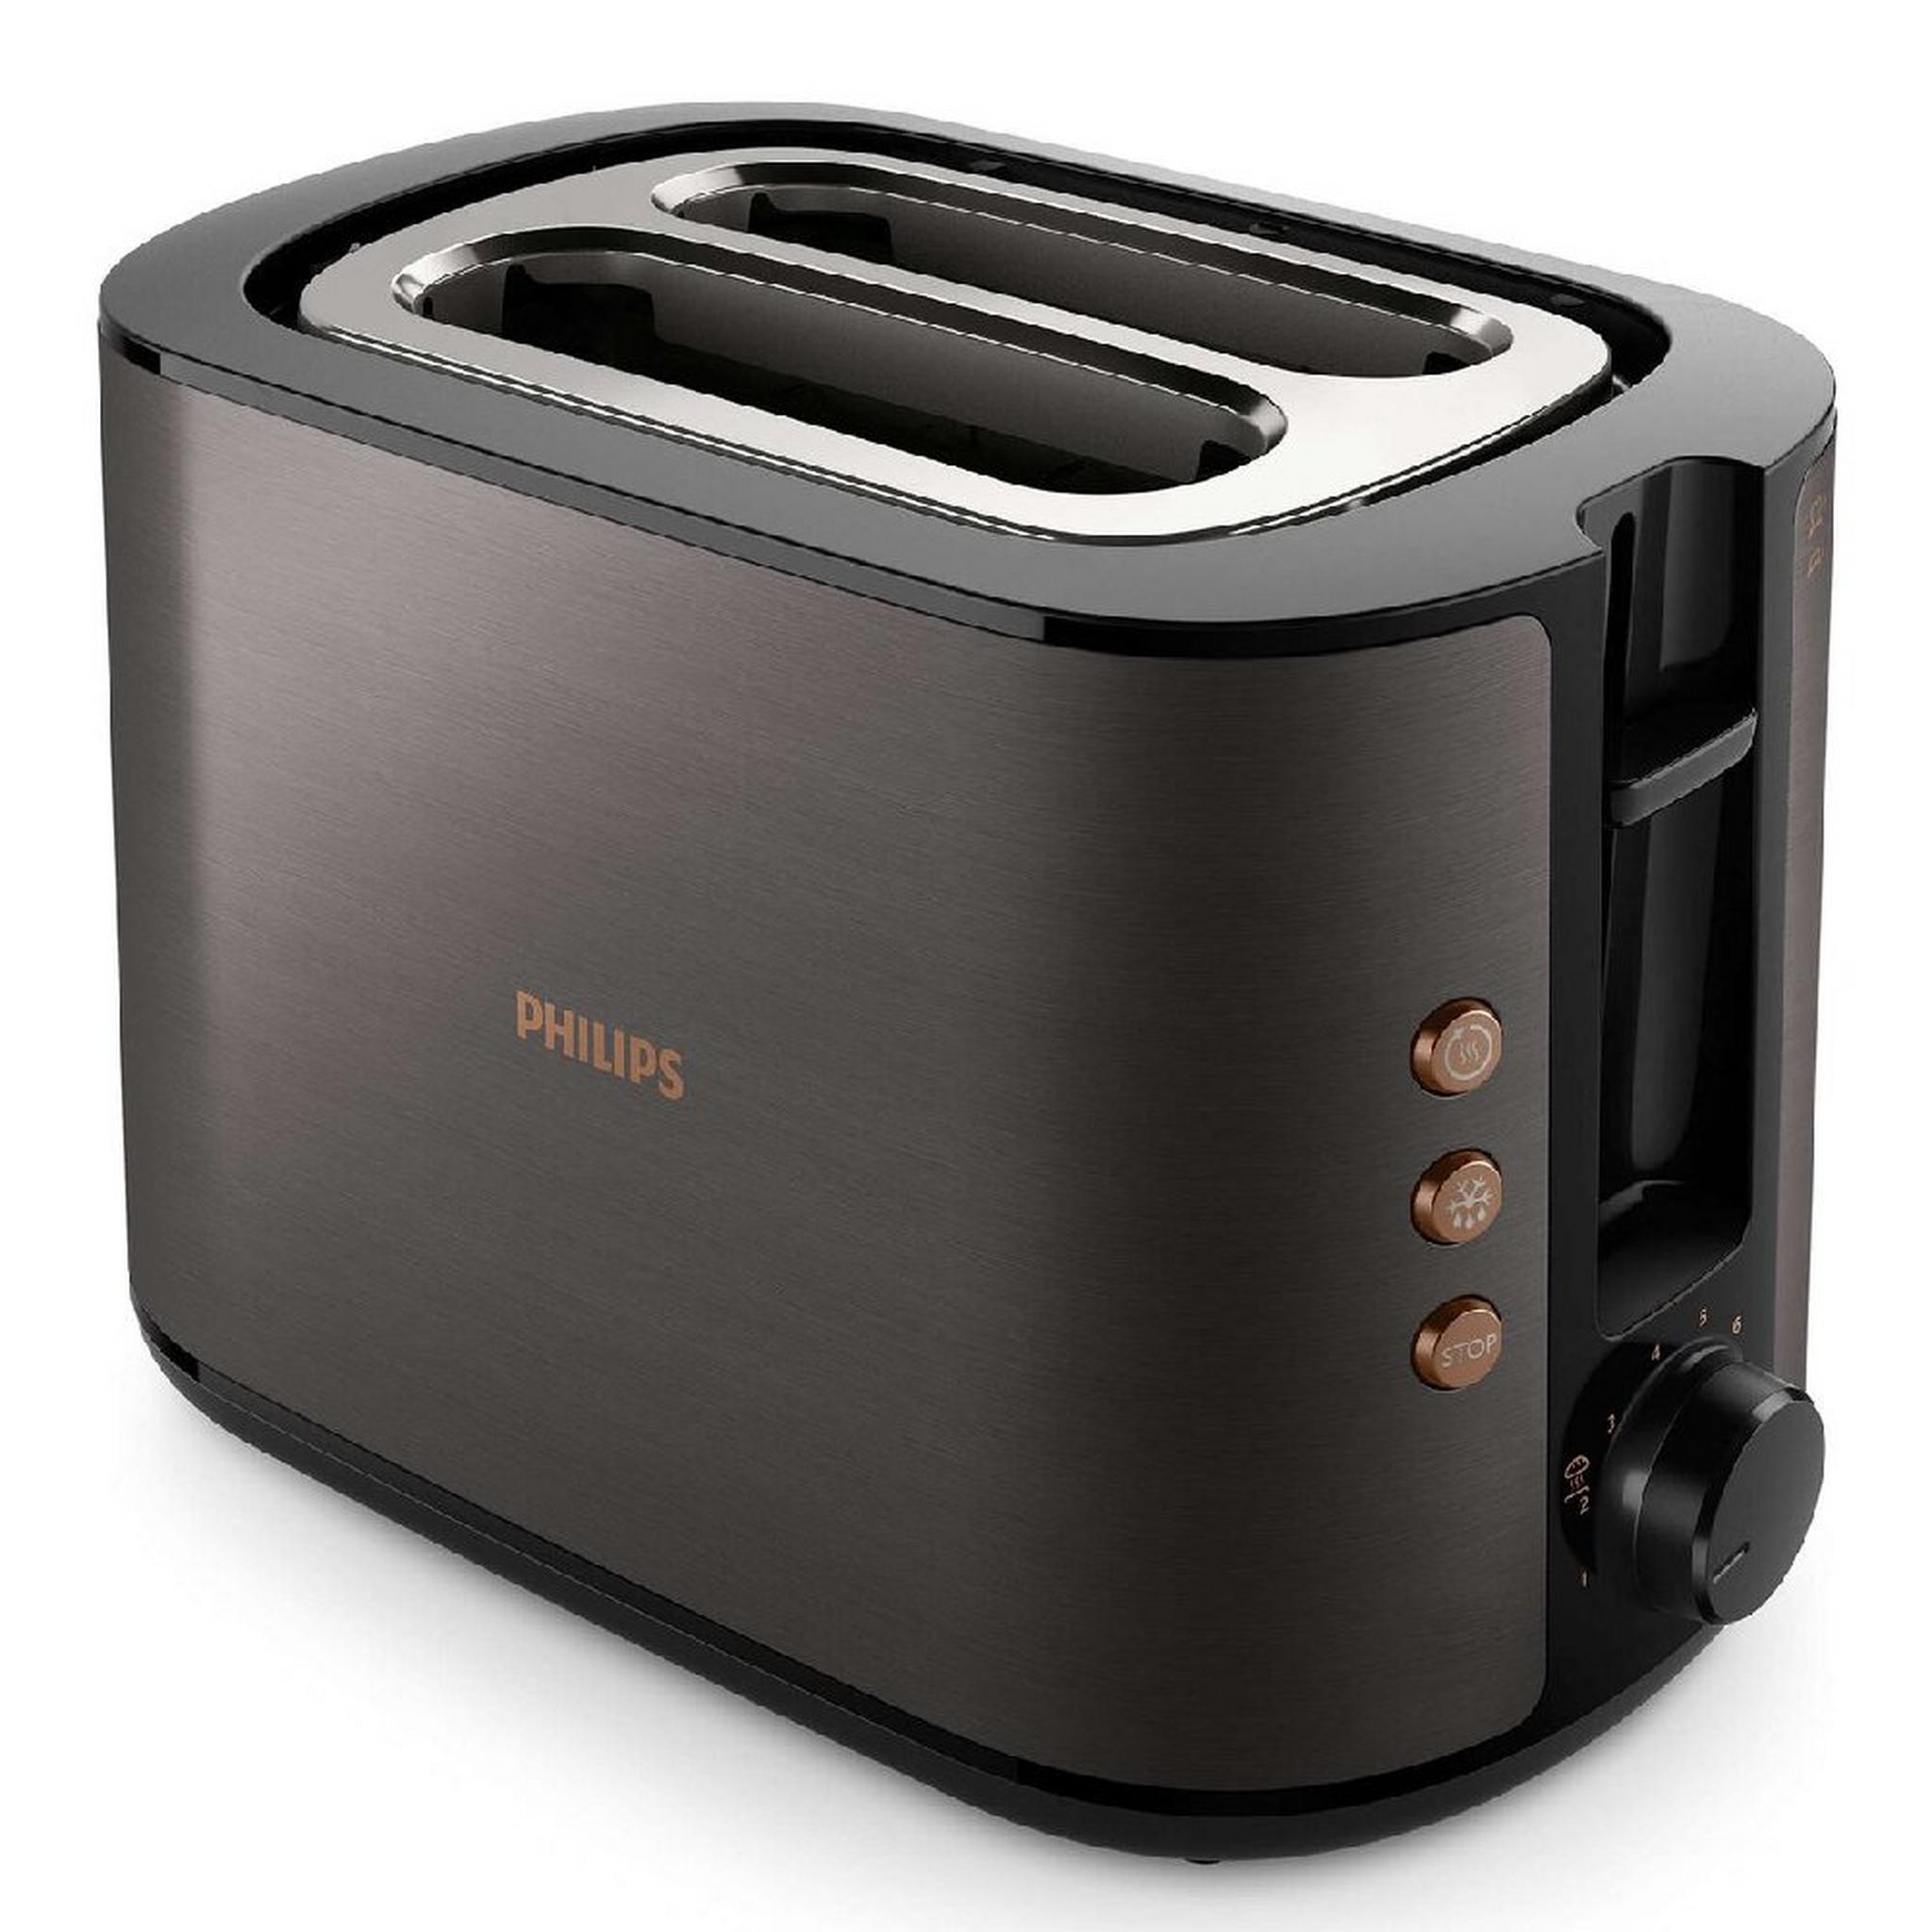 Philips 5000 Series 2-Slice Adjustable Browning Toaster, HD2650/31 - Black and Copper